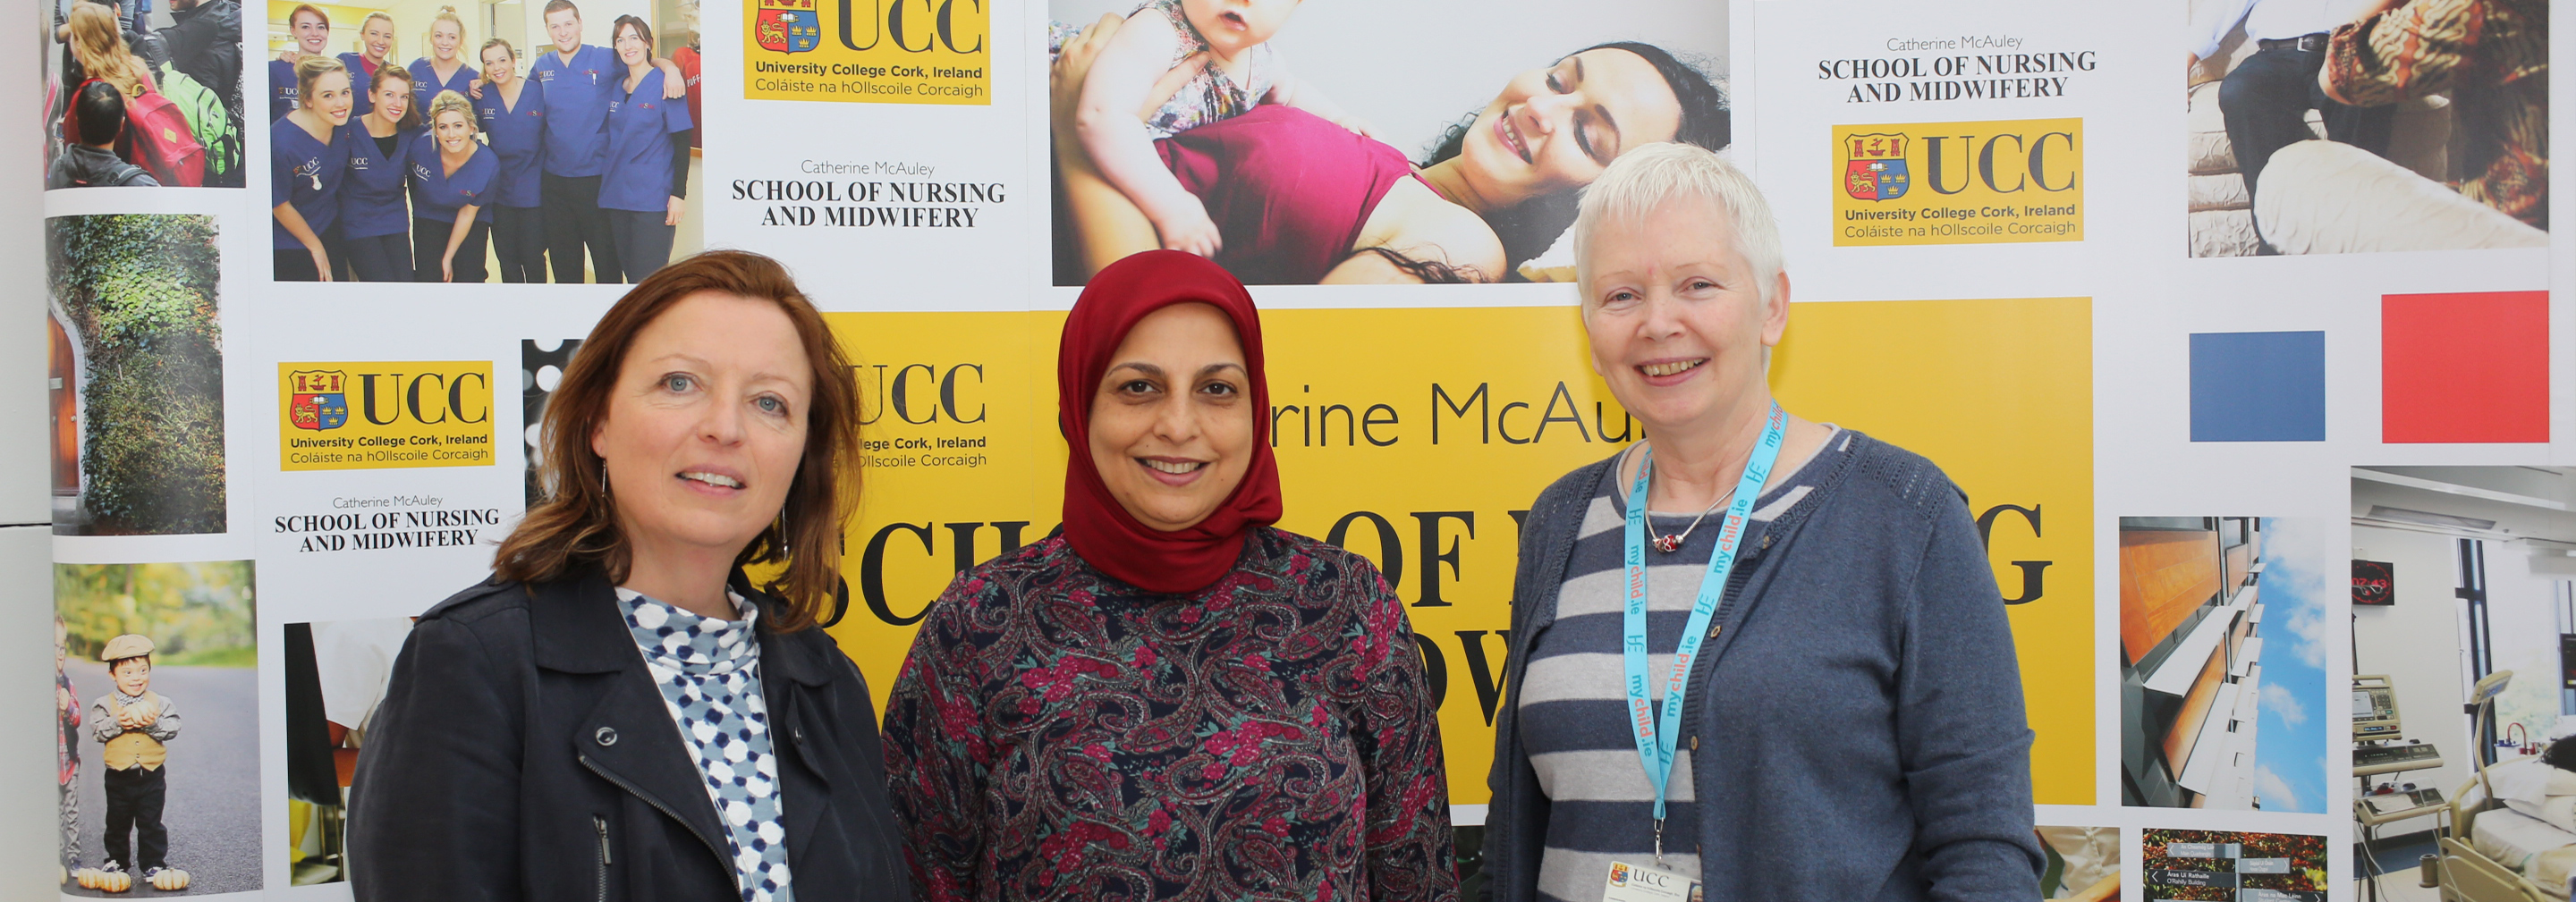 Open child health lecture by Professor Farhana Sharif in the School of Nursing and Midwifery, UCC 